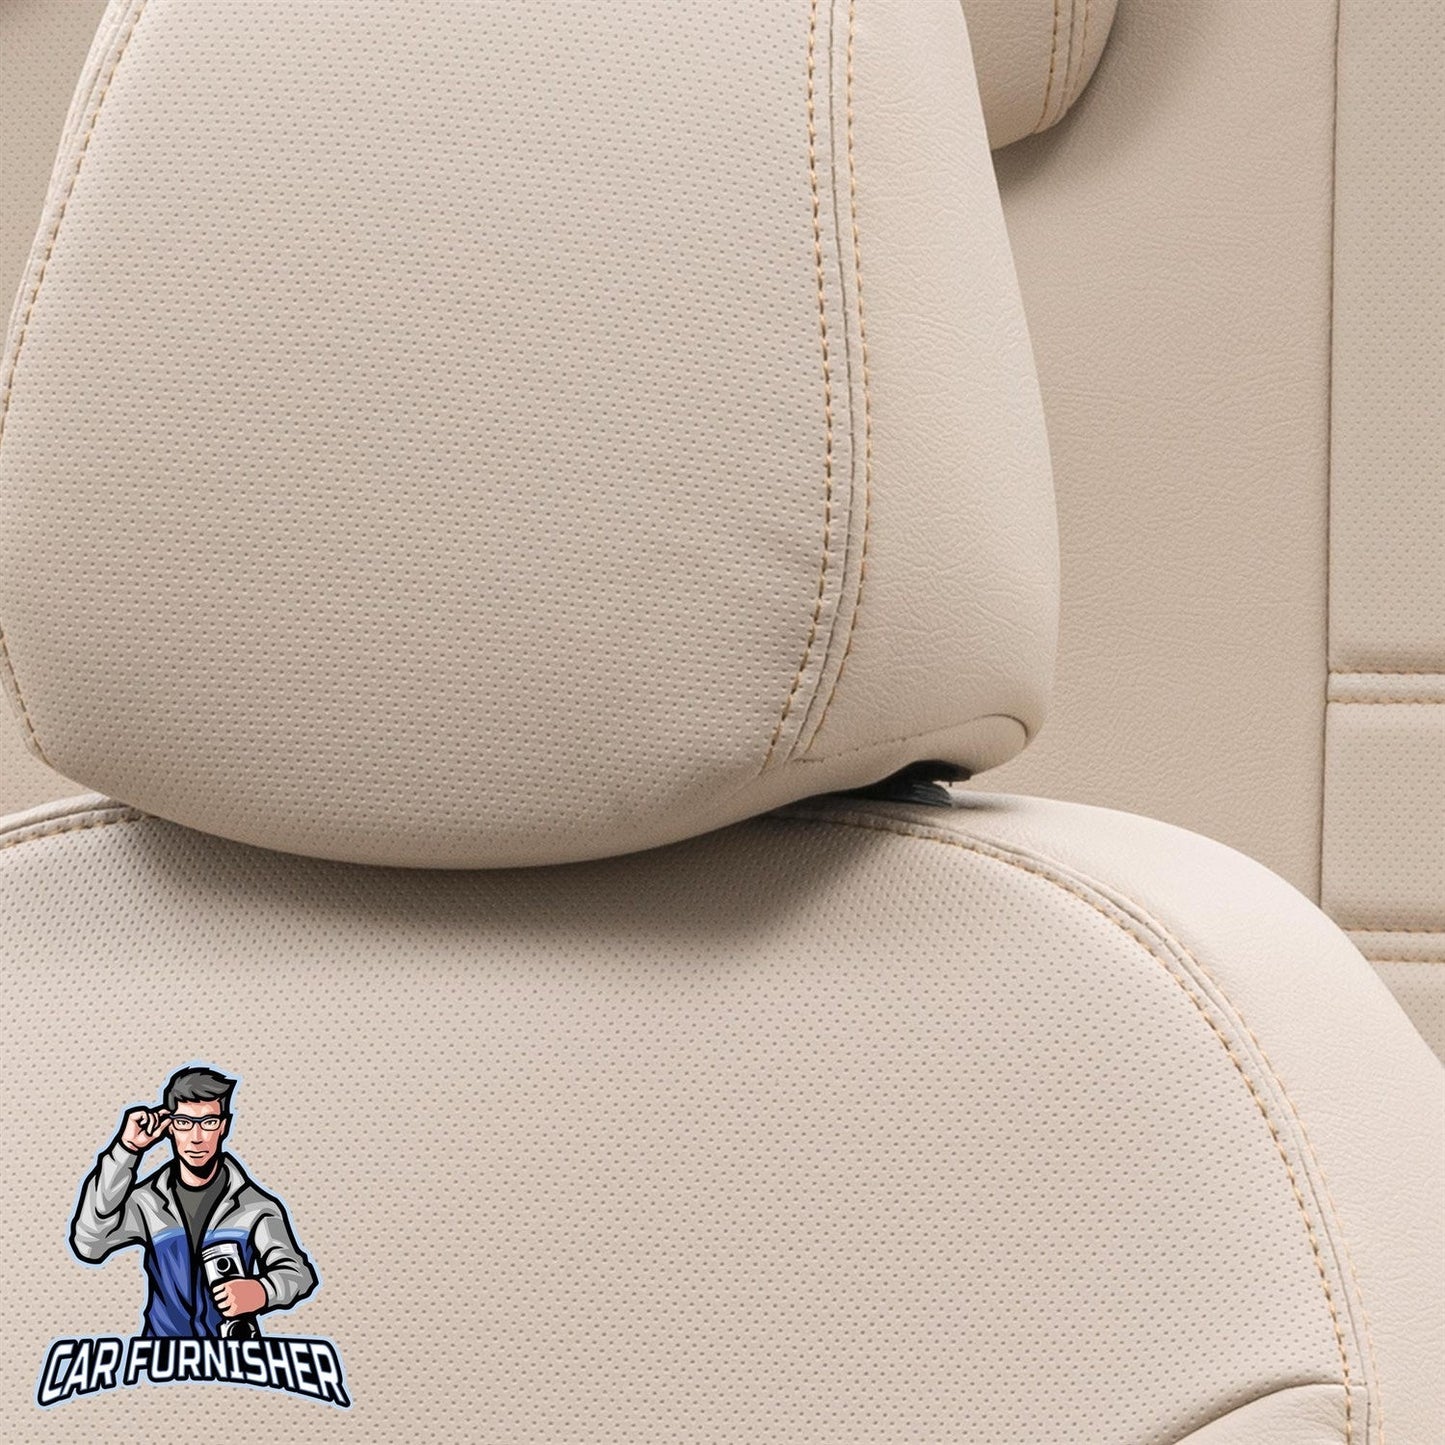 Honda HRV Seat Covers Istanbul Leather Design Beige Leather